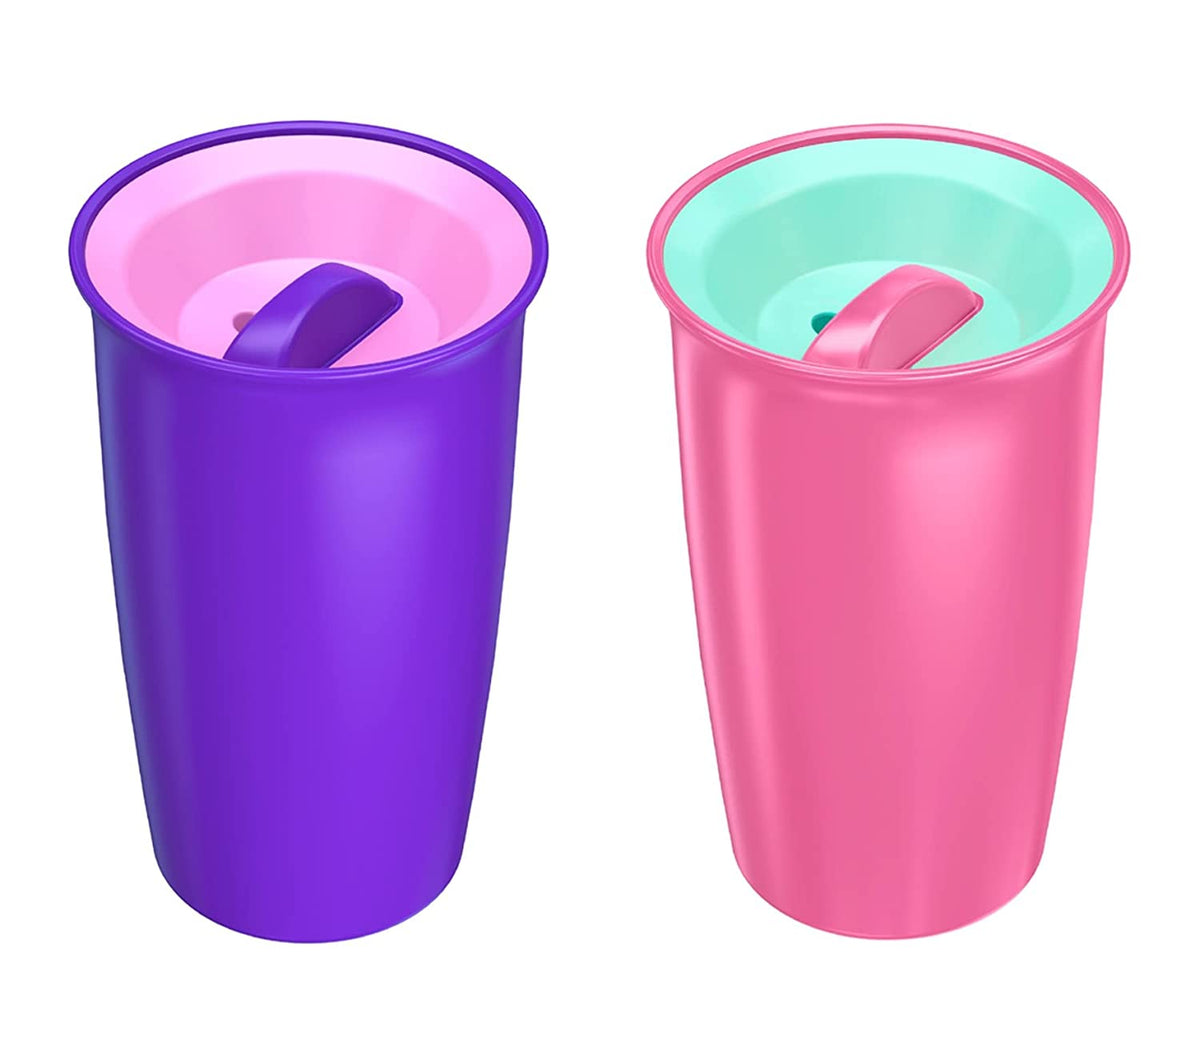 Frozen Sip Around Spoutless Cup - 2 Cups in 1 Spoutless for 360